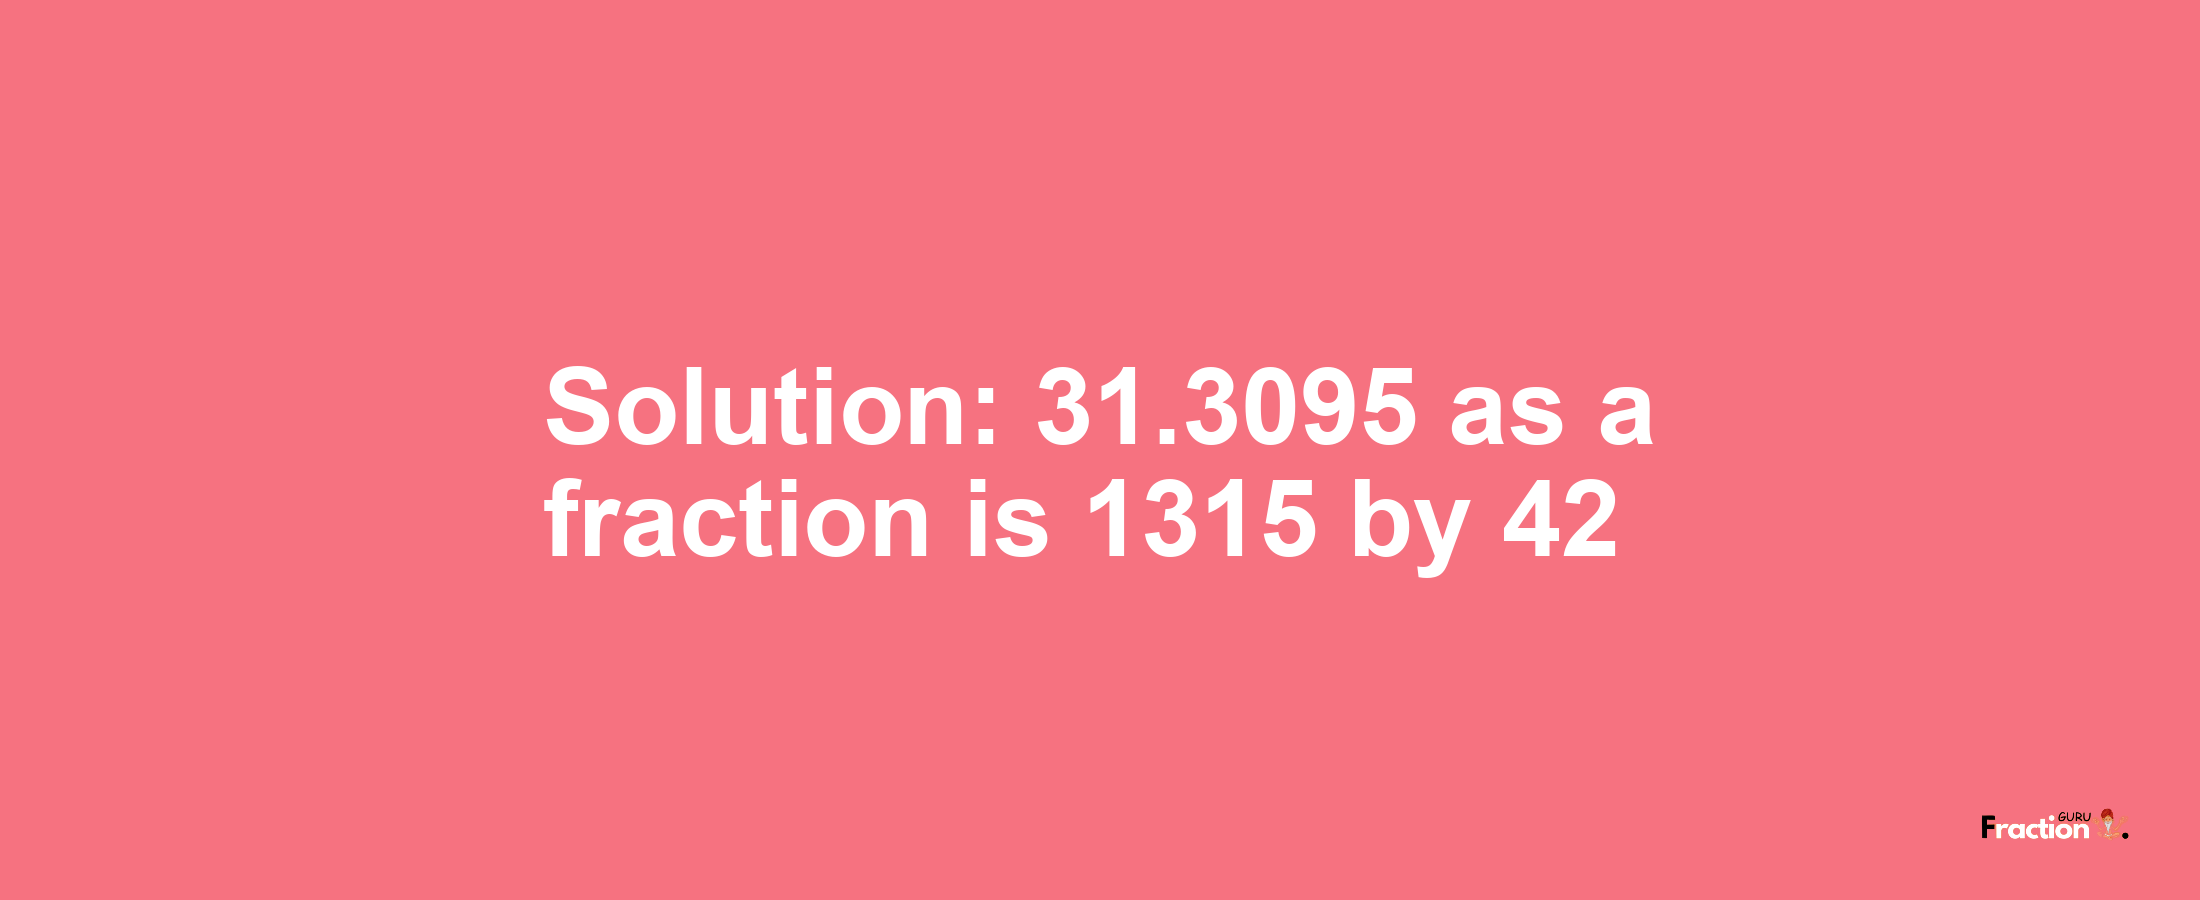 Solution:31.3095 as a fraction is 1315/42